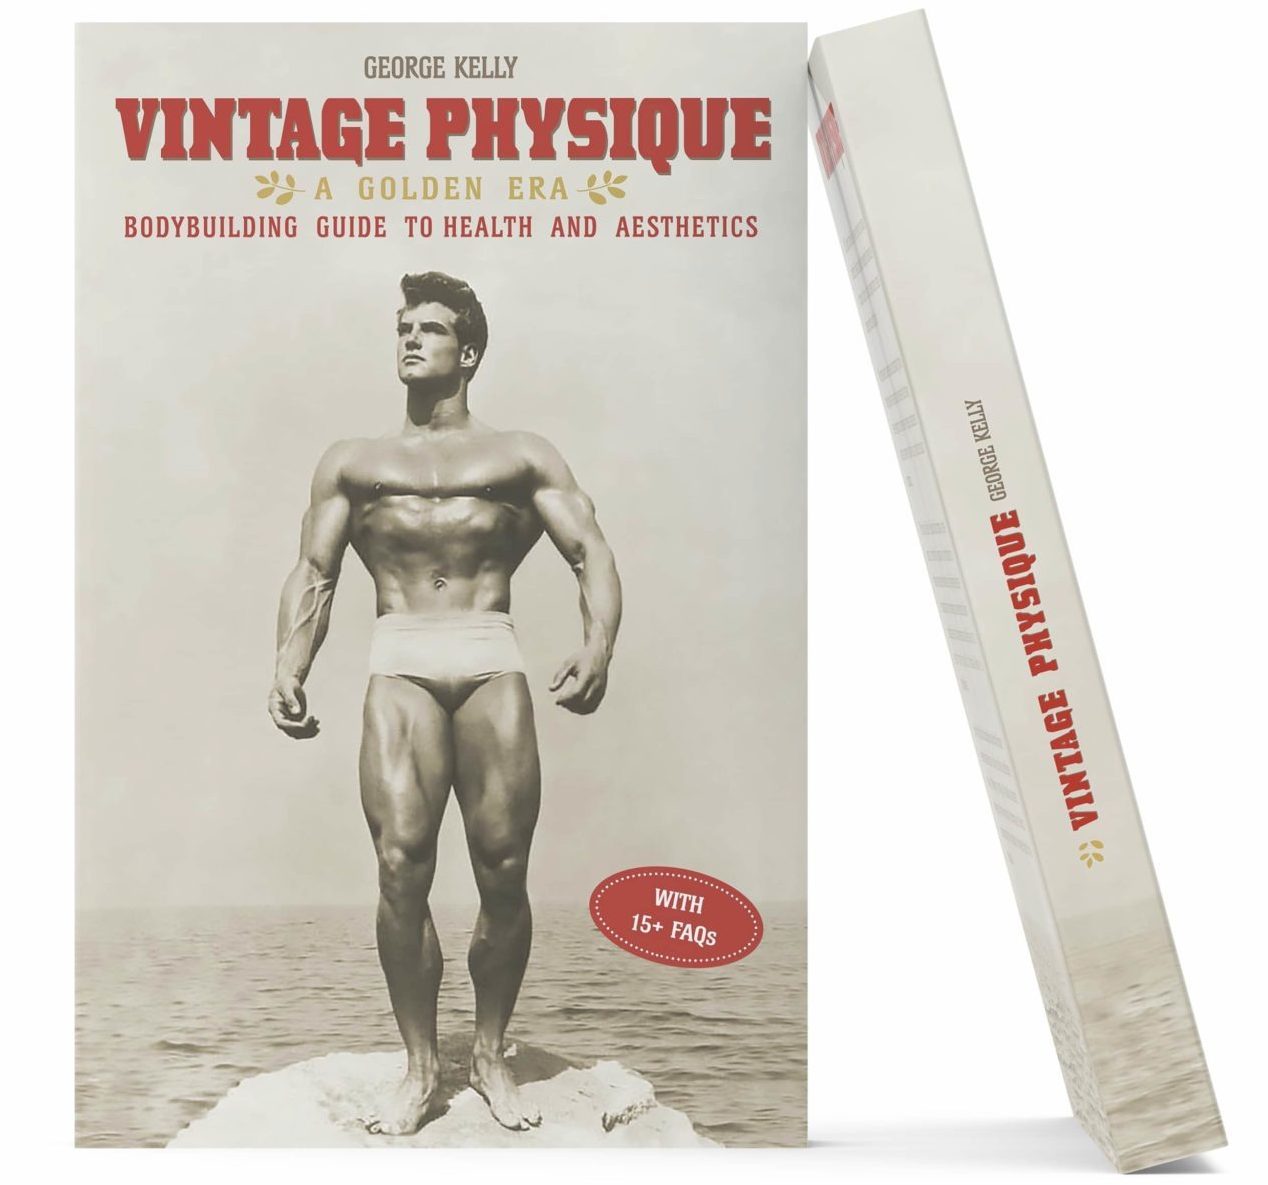 Vintage Physique A Golden Era Bodybuilding Guide to Health and Aesthetics